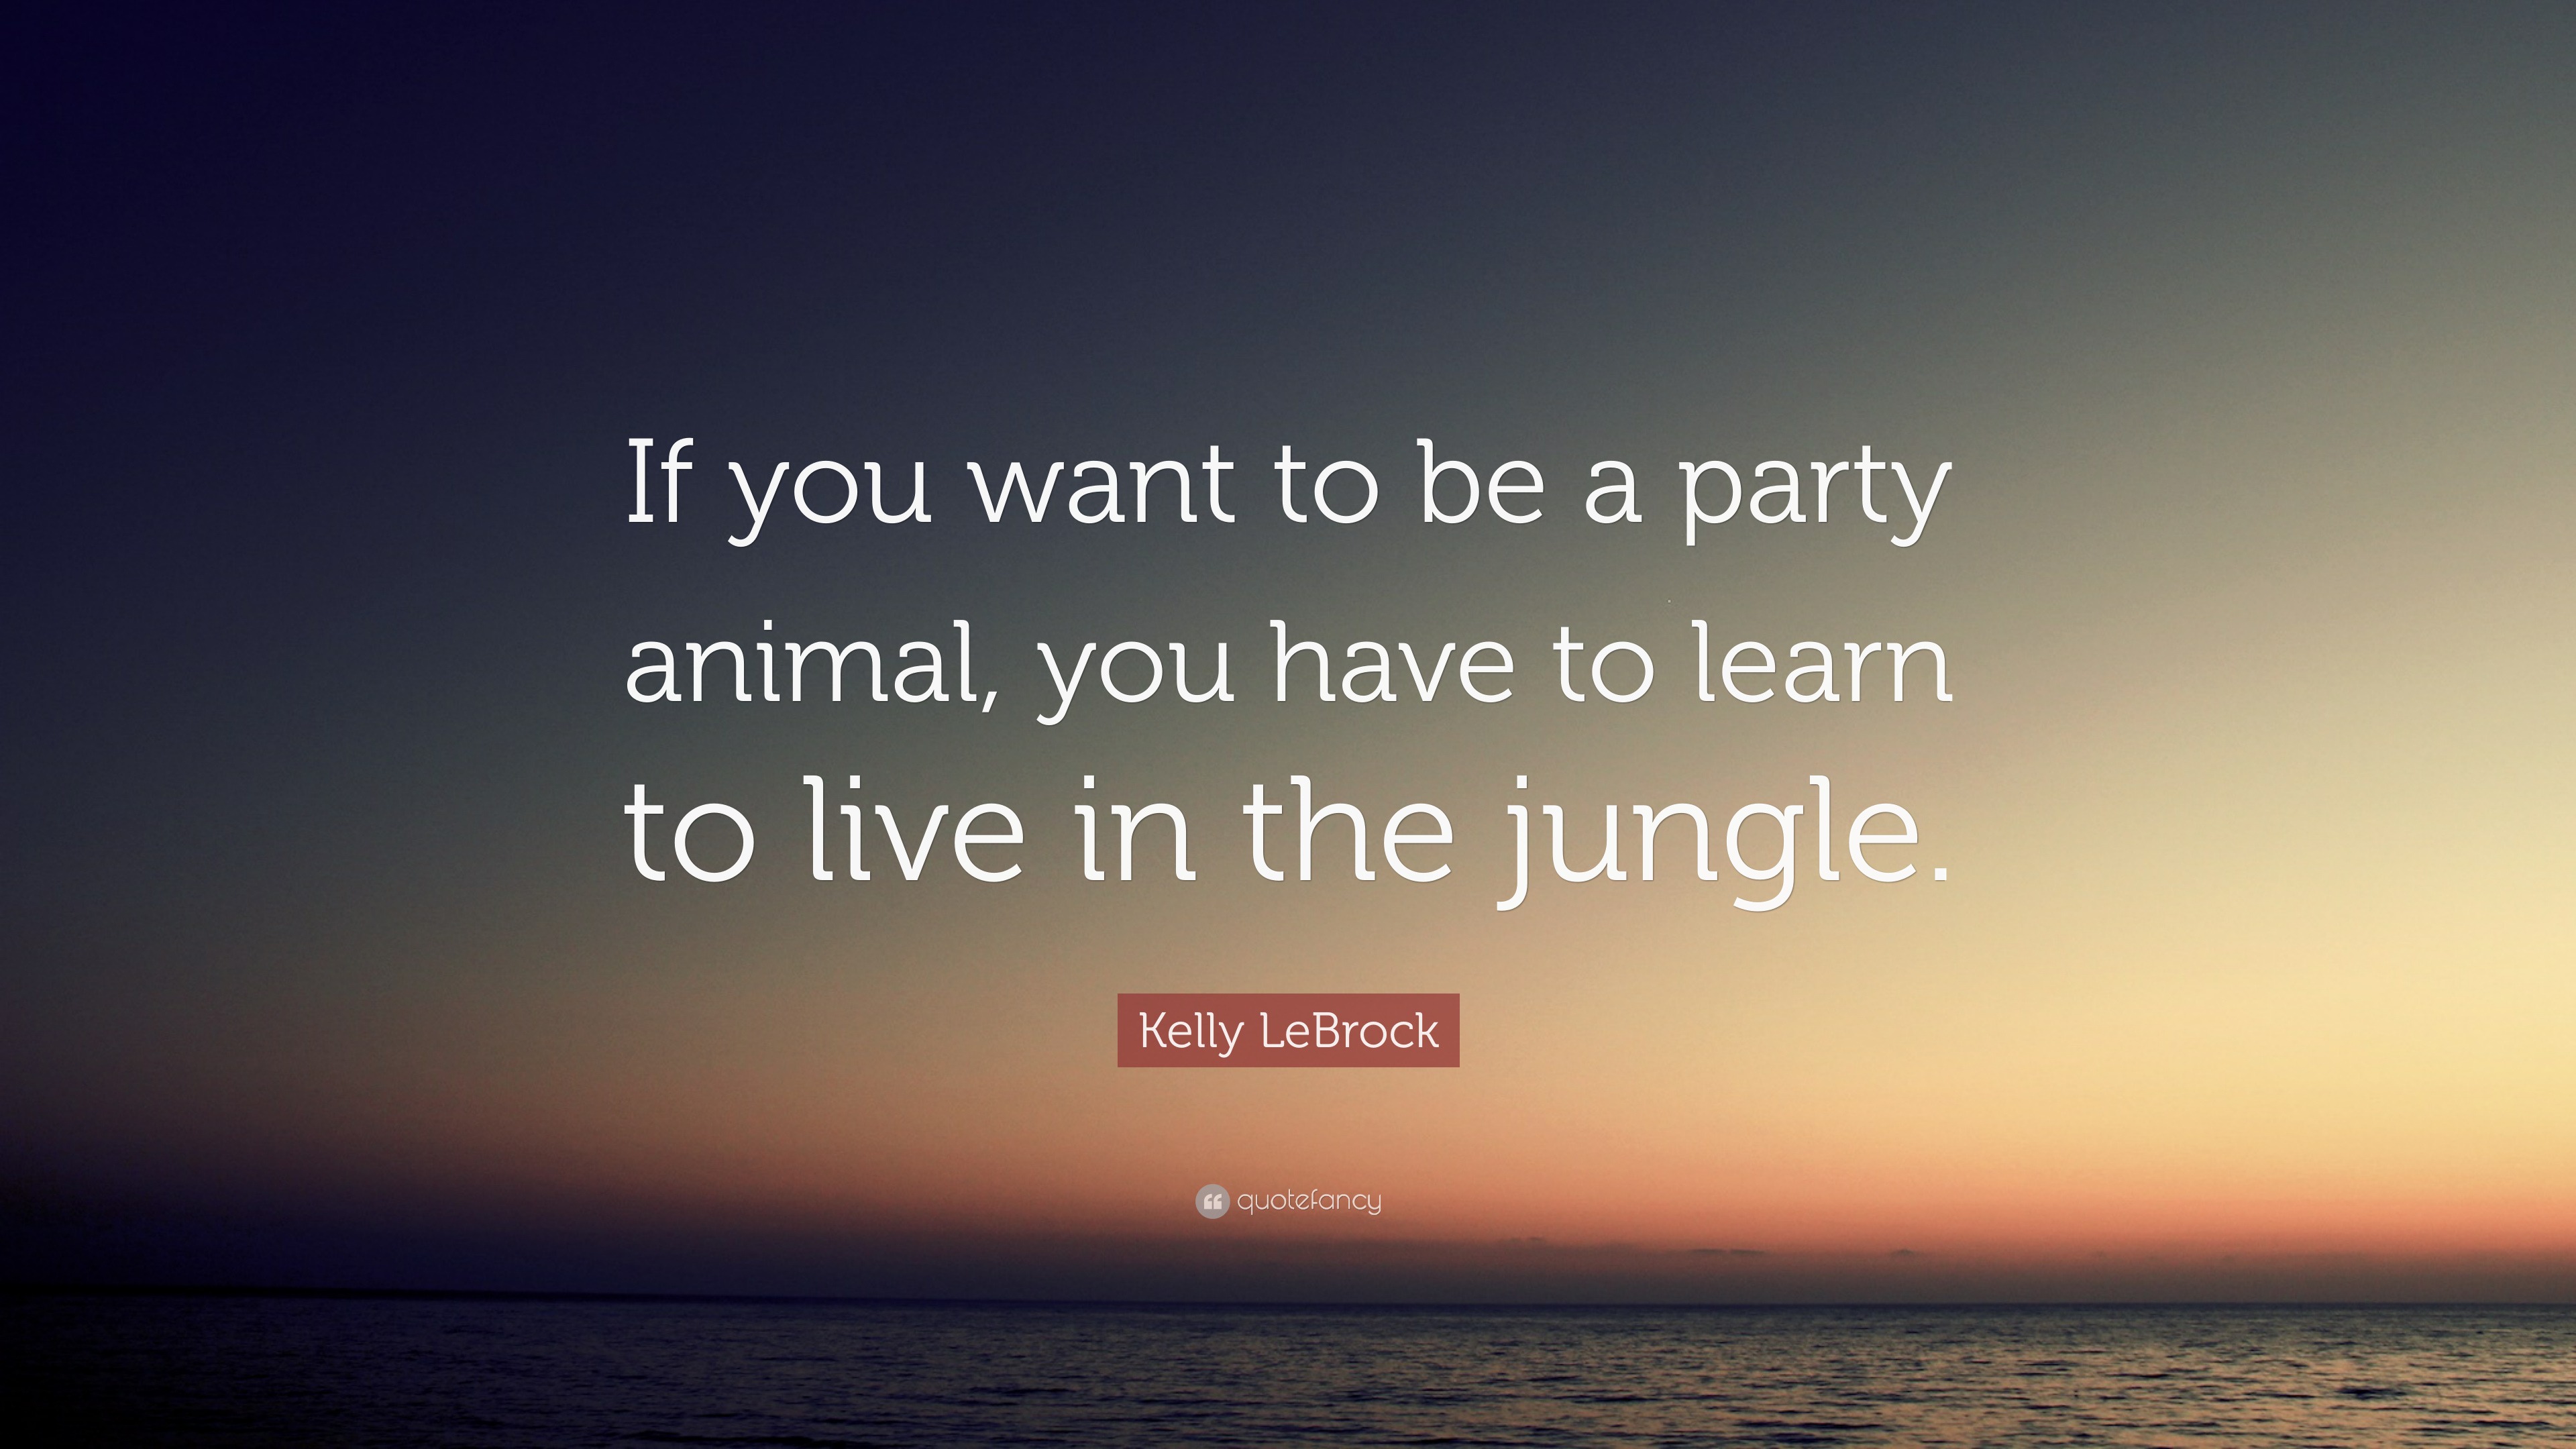 Kelly LeBrock Quote: “If you want to be a party animal, you have to learn to